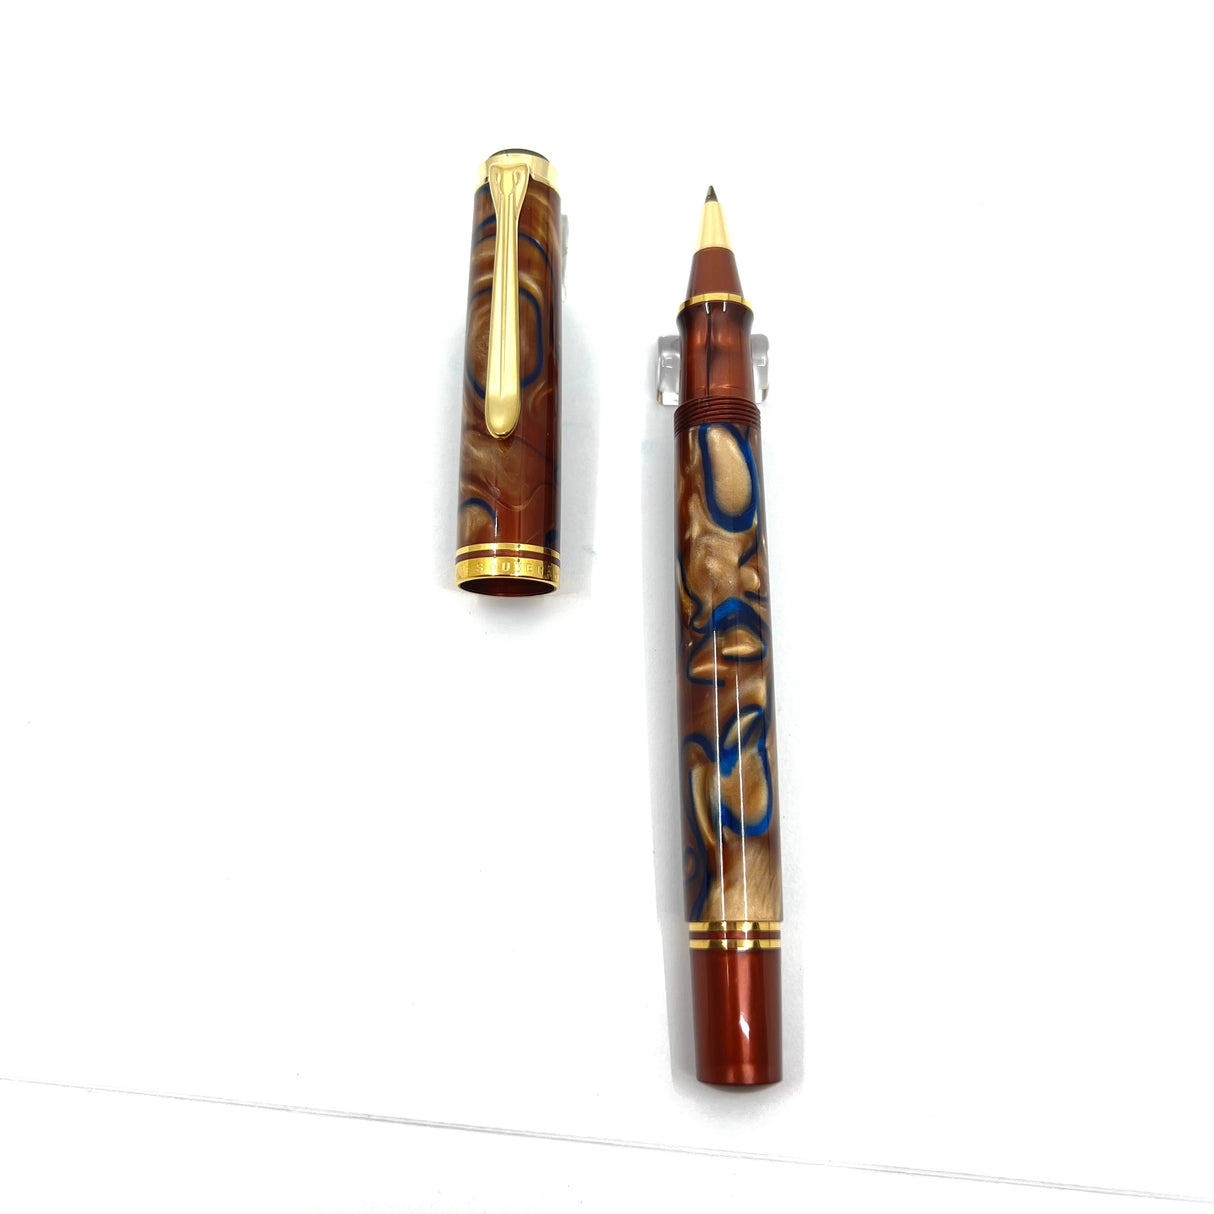 Pelikan Grand Place, Brussels "Historic Places" Edition R620 Rollerball